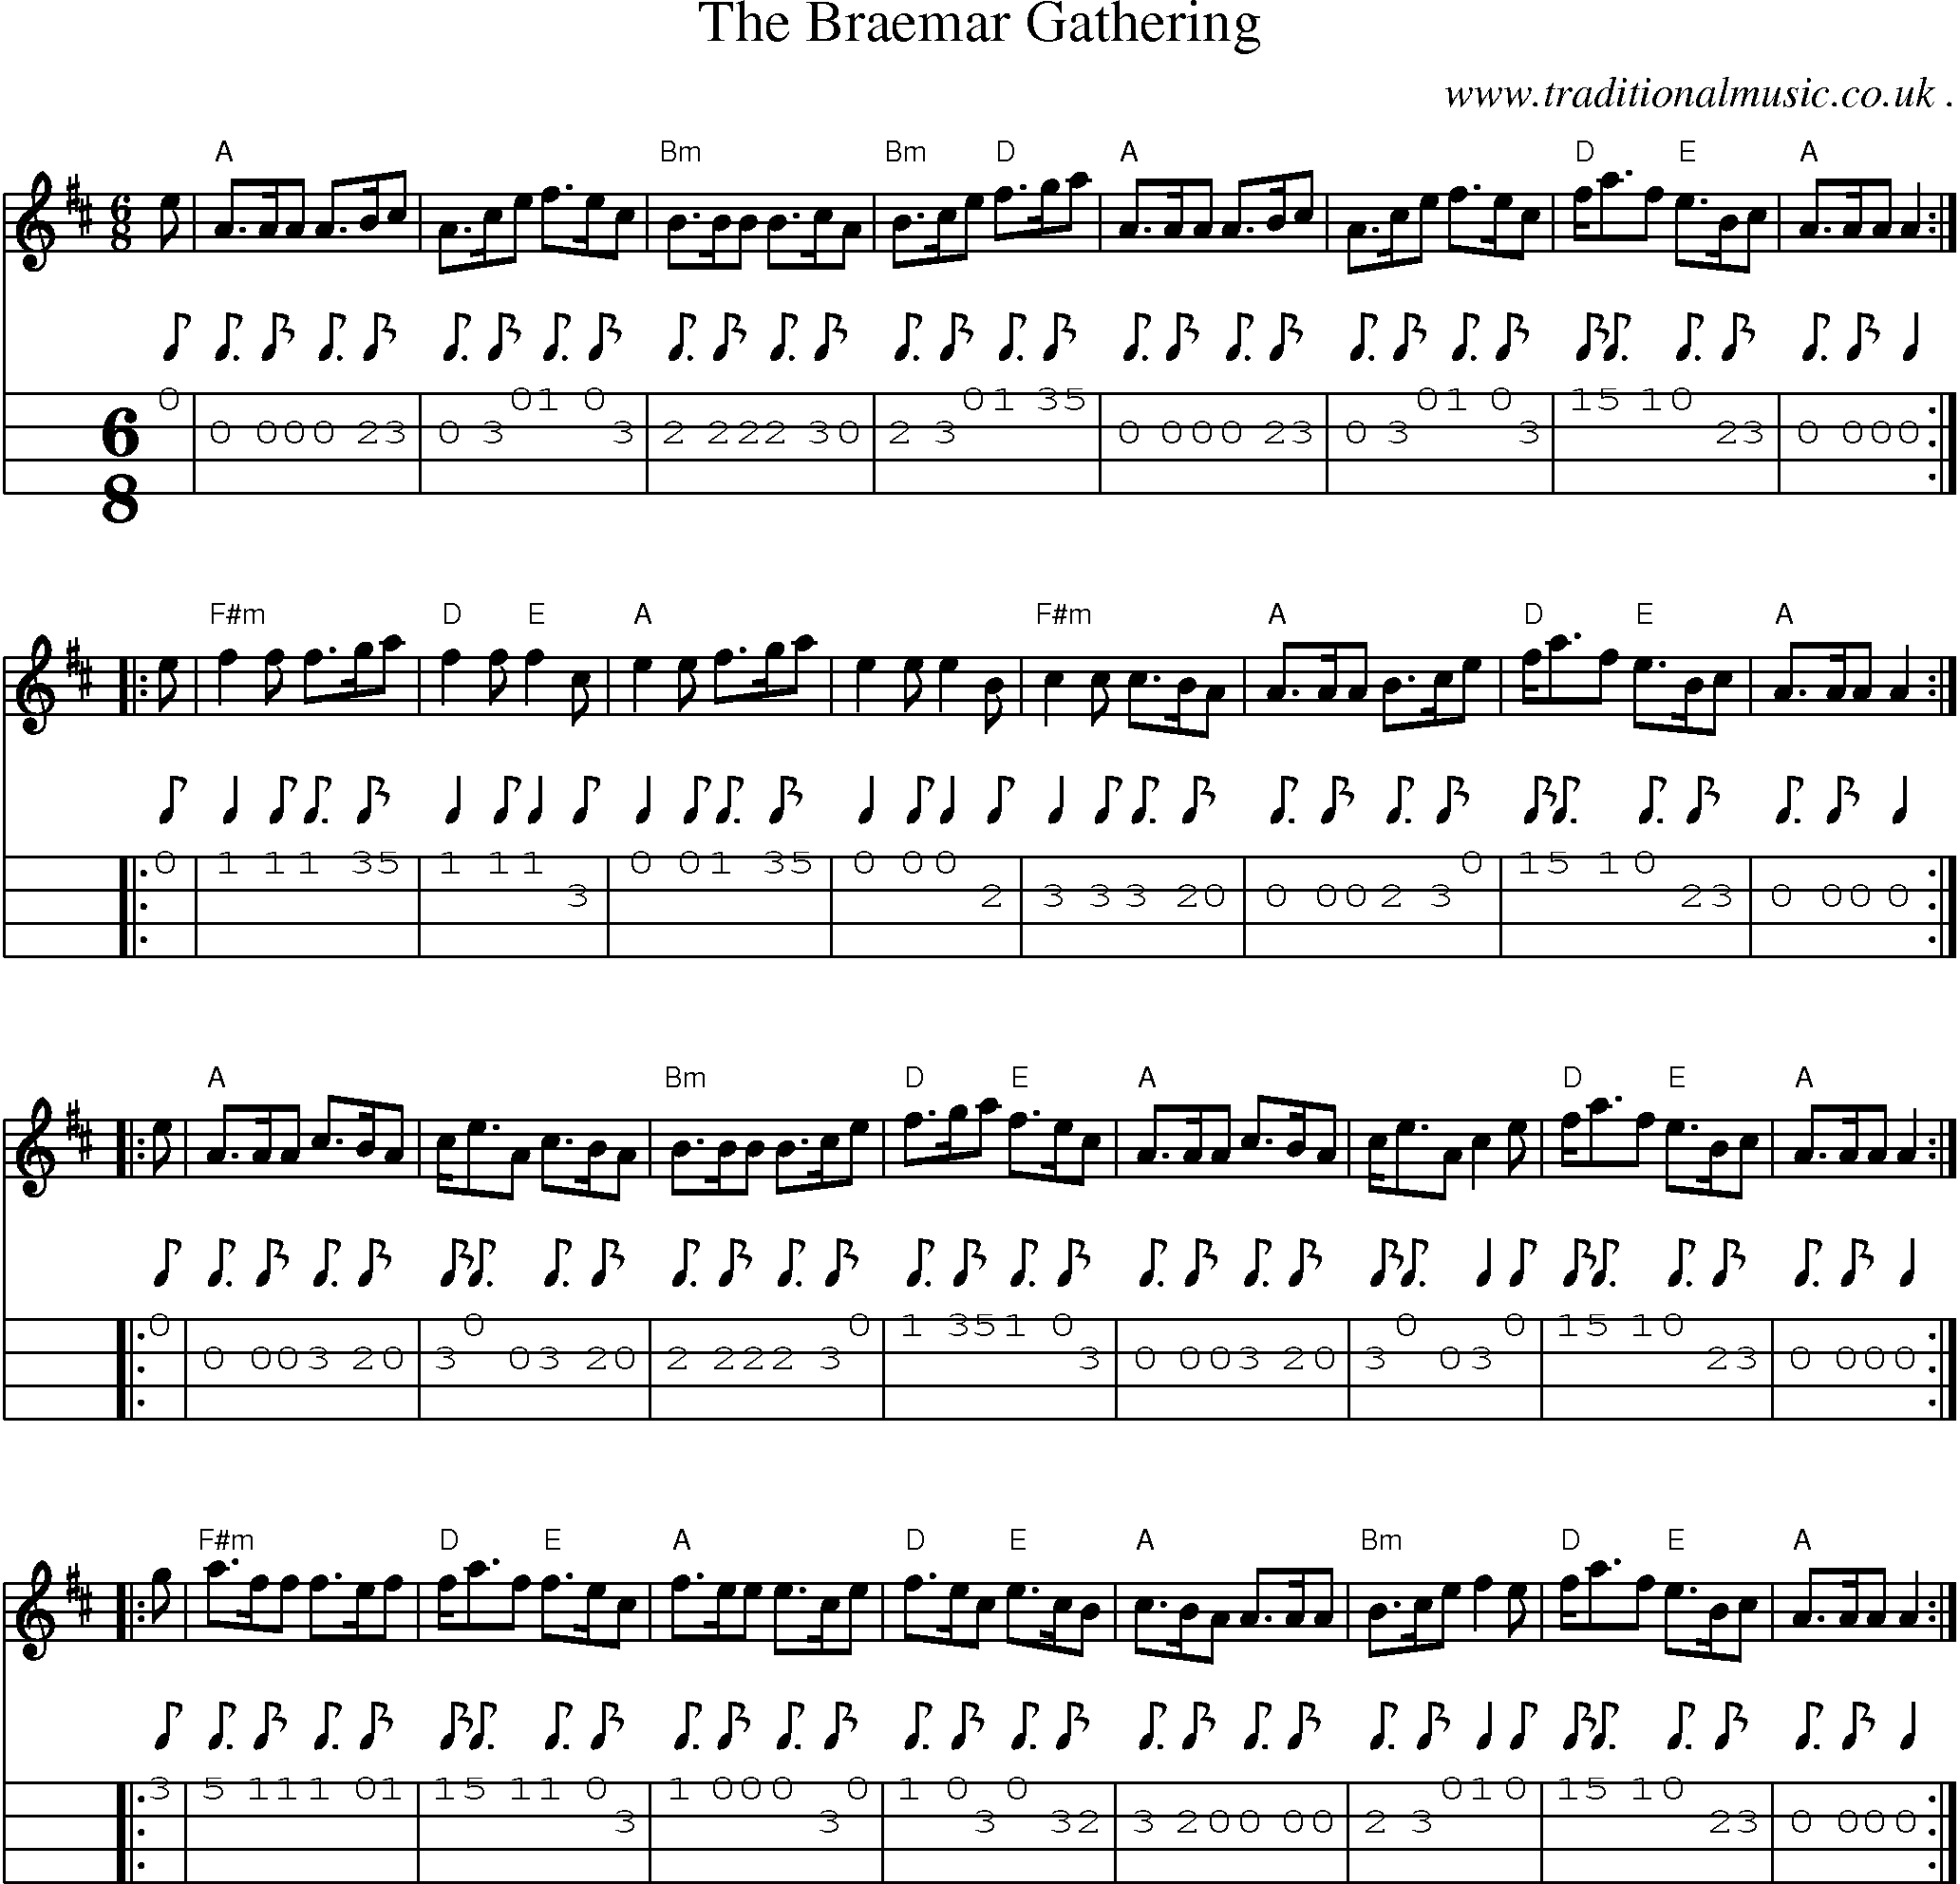 Sheet-music  score, Chords and Mandolin Tabs for The Braemar Gathering